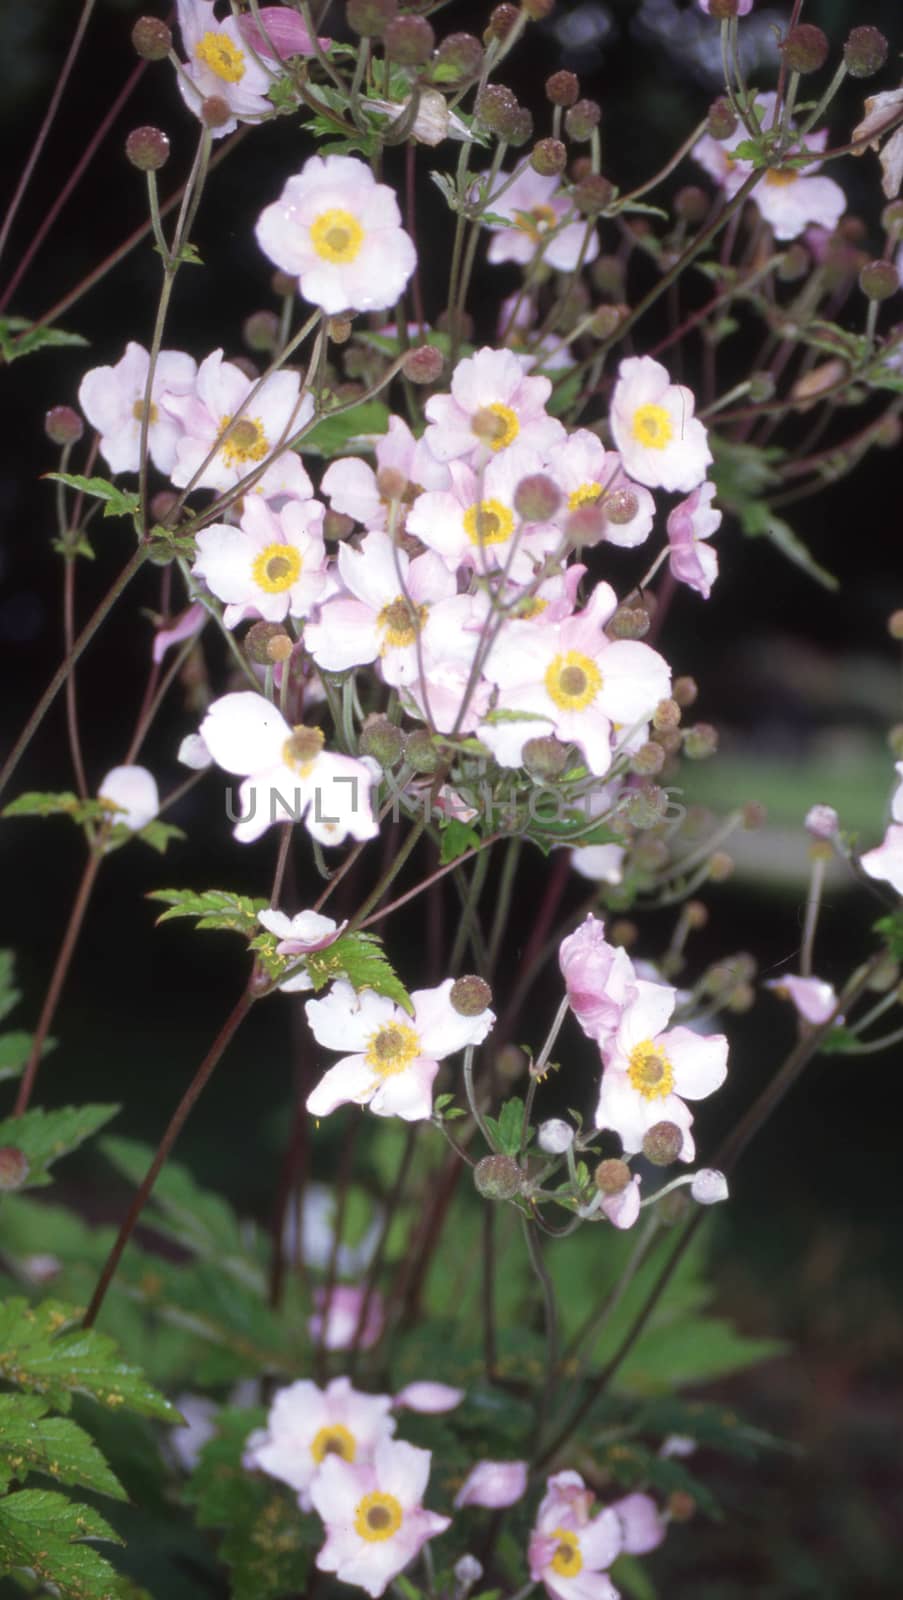 Wood anemone with pink flowers